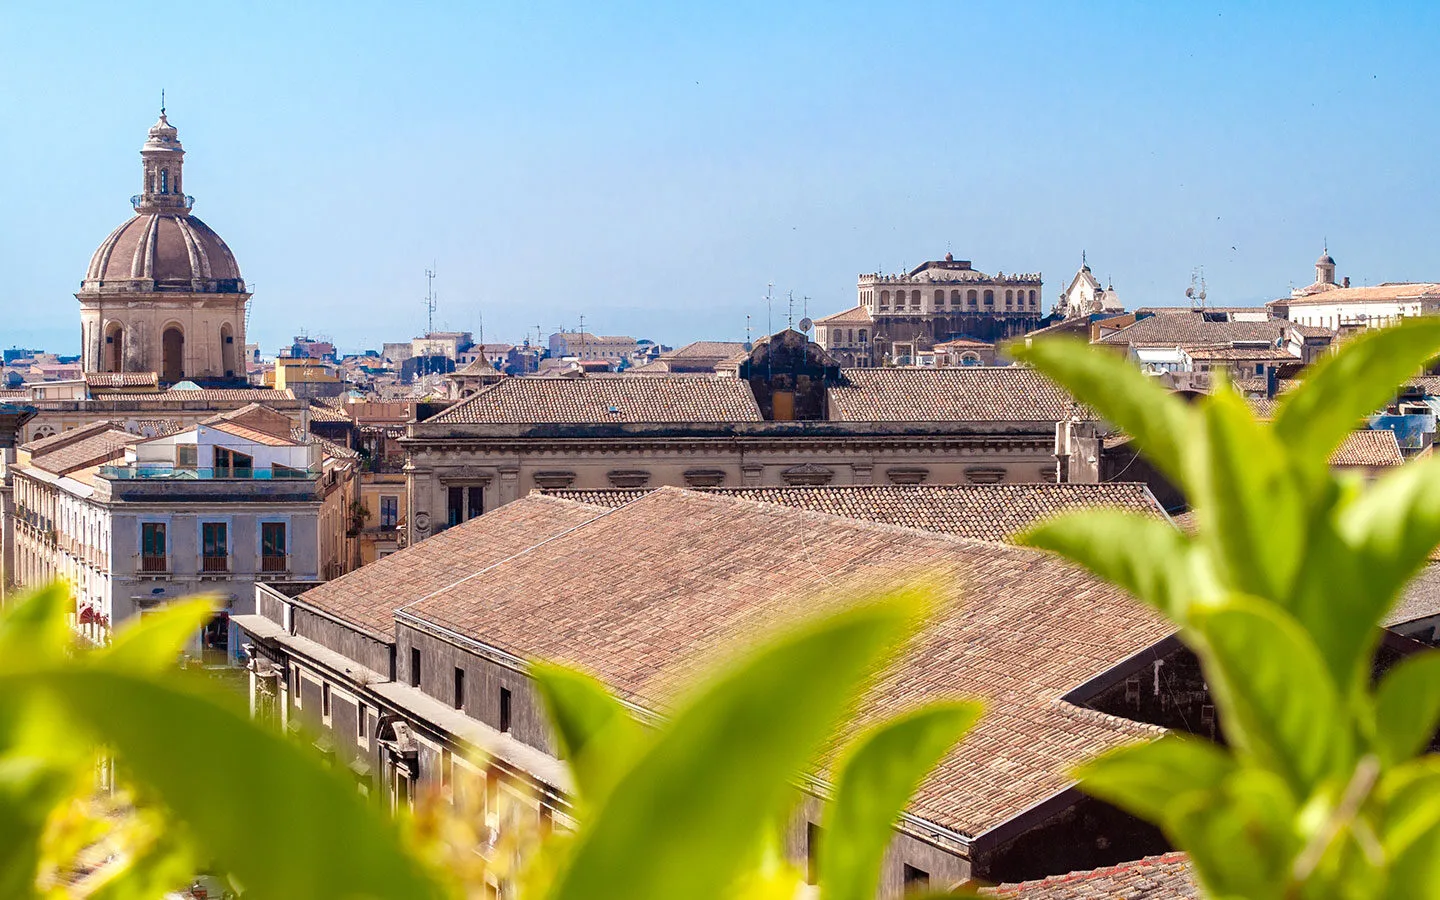 Views over the rooftops of Catania in Sicily